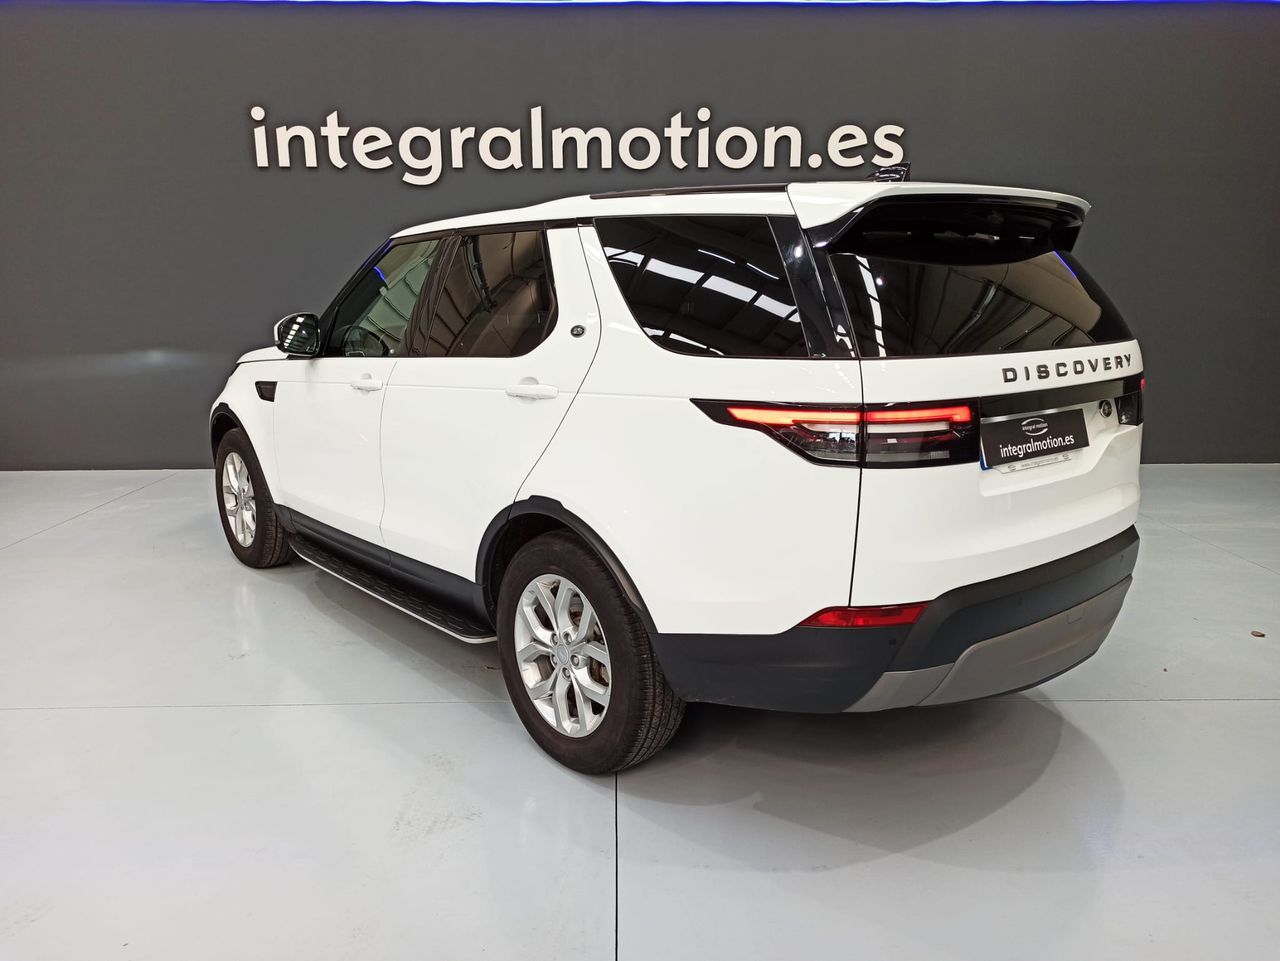 Foto Land-Rover Discovery 19